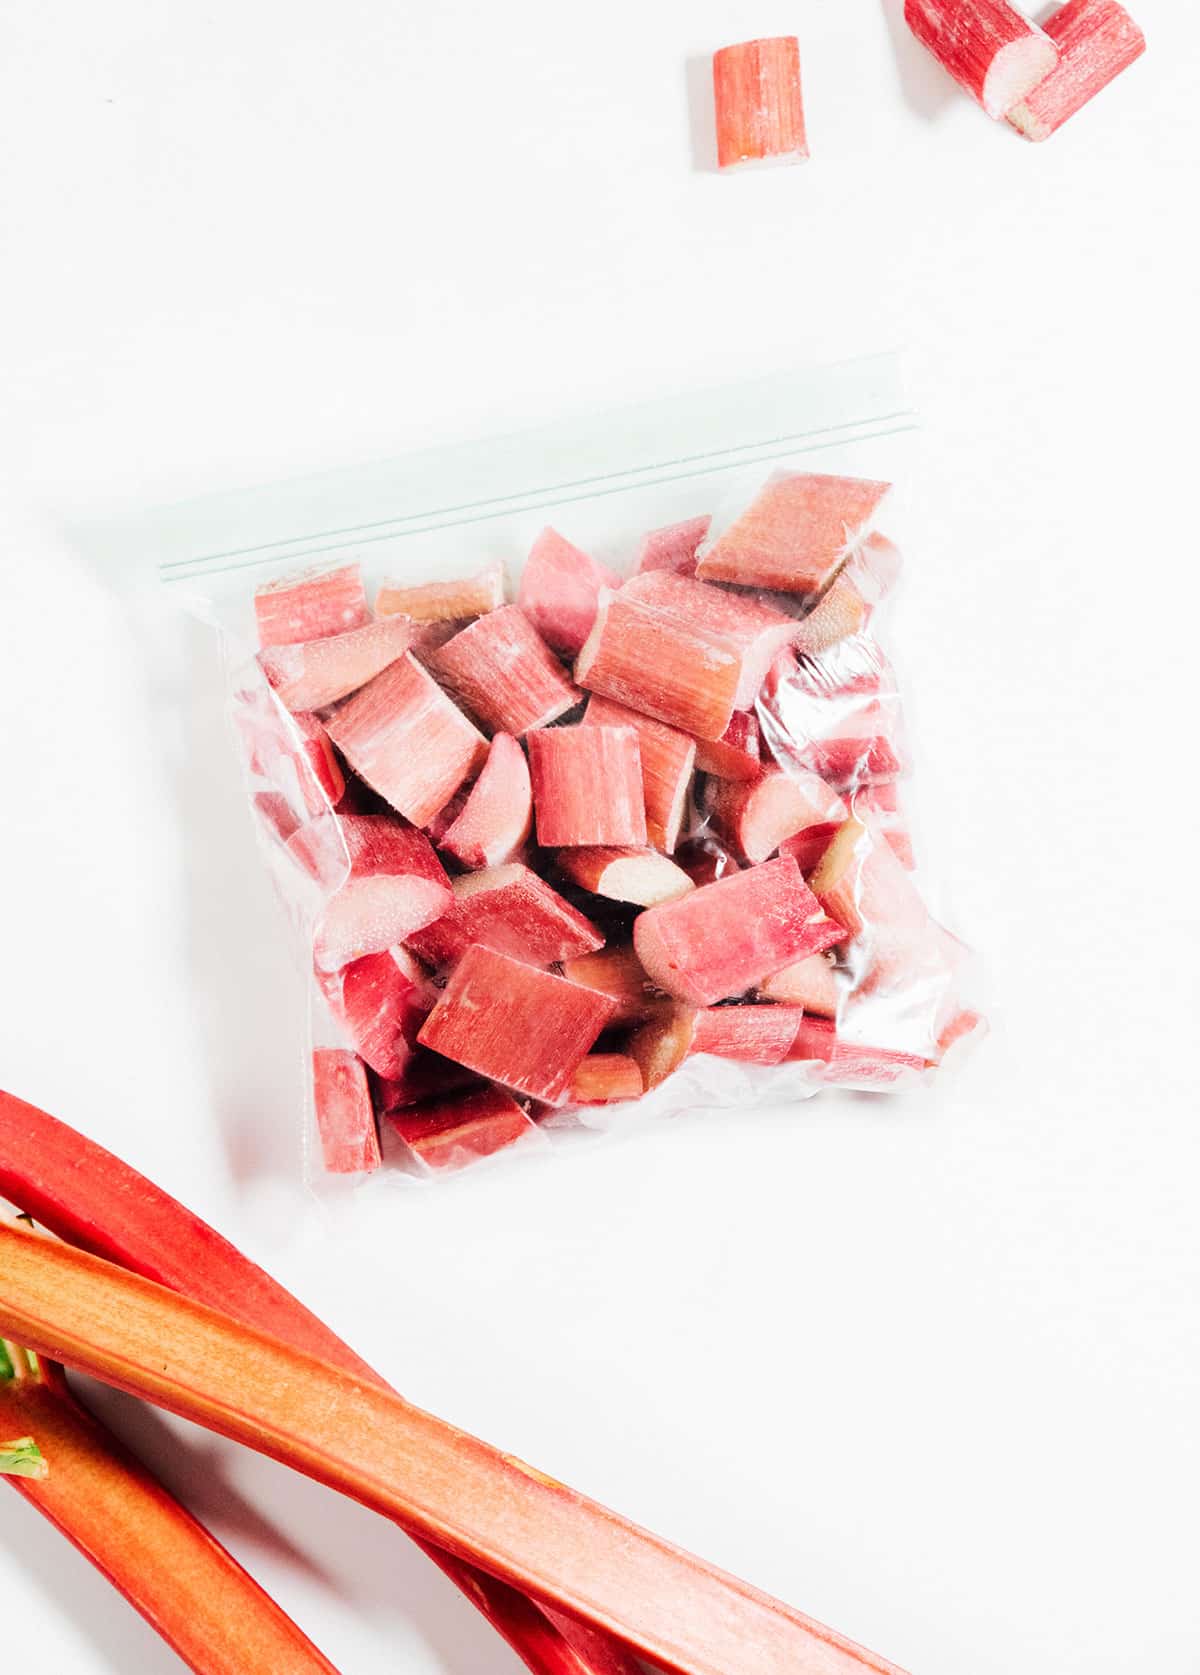 Bag of frozen rhubarb on a white background.